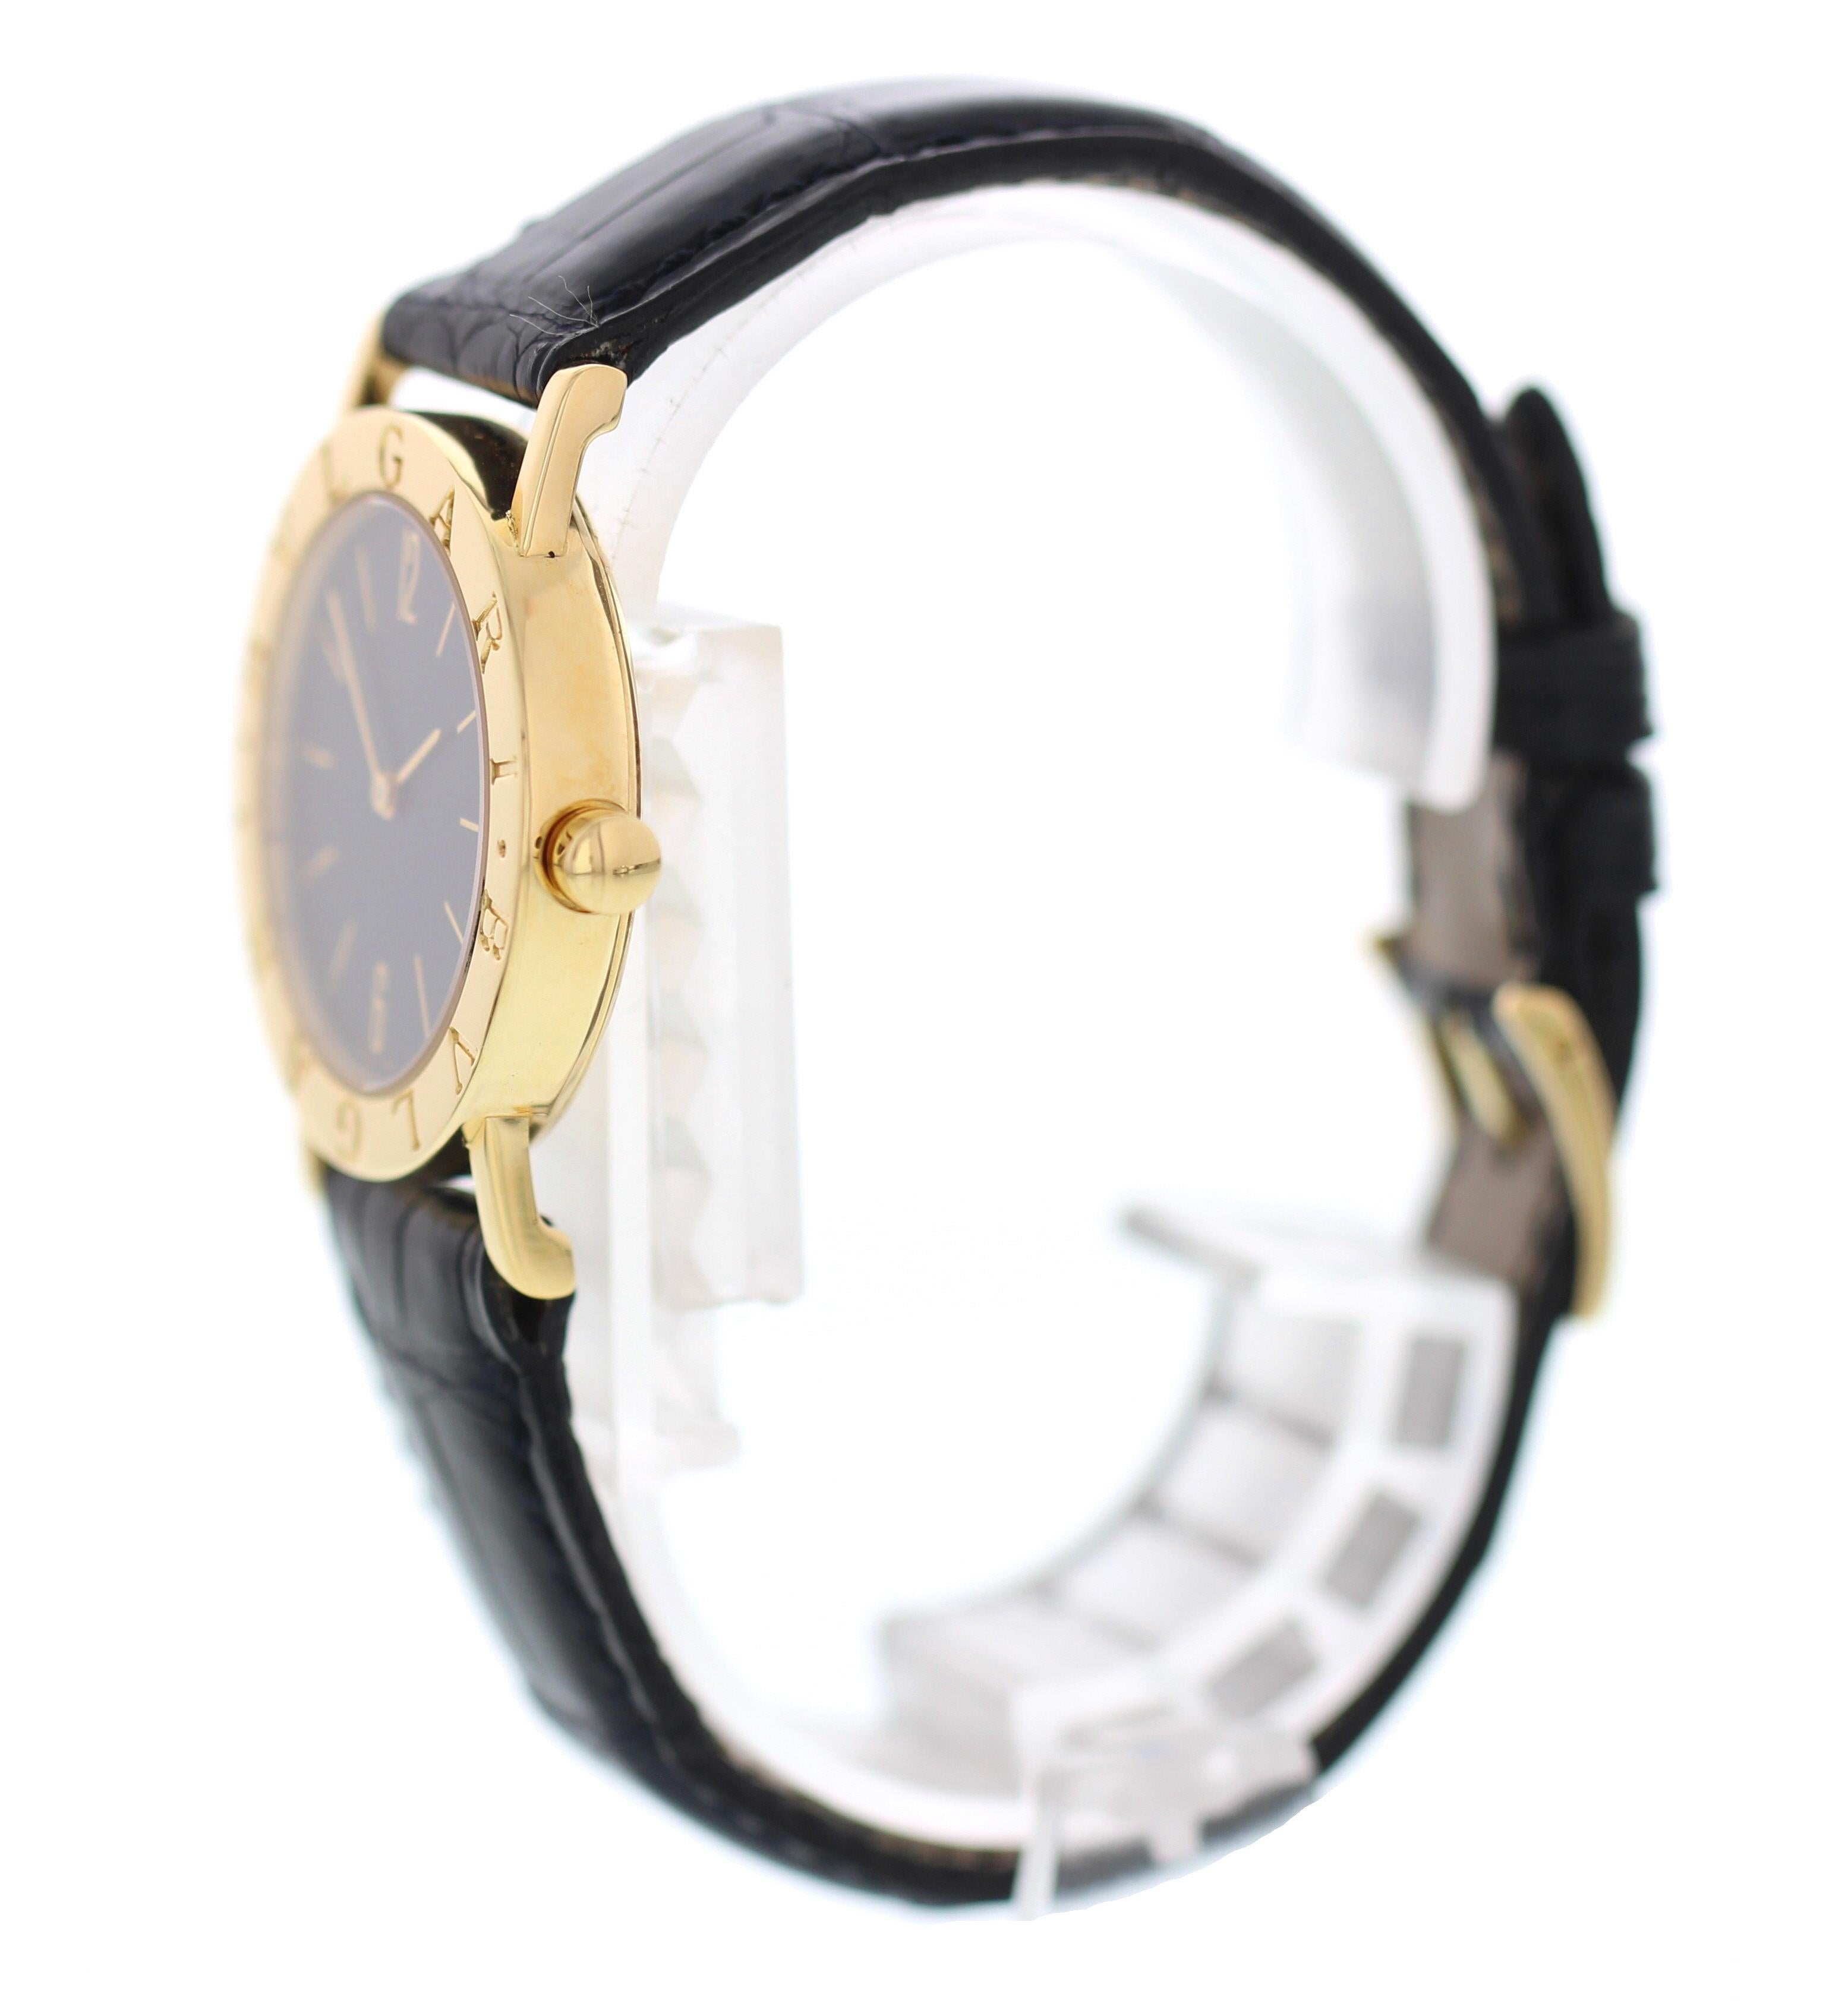 Bvlgari 18 Karat Yellow Gold BB 30 GL Ladies Watch In Excellent Condition For Sale In New York, NY